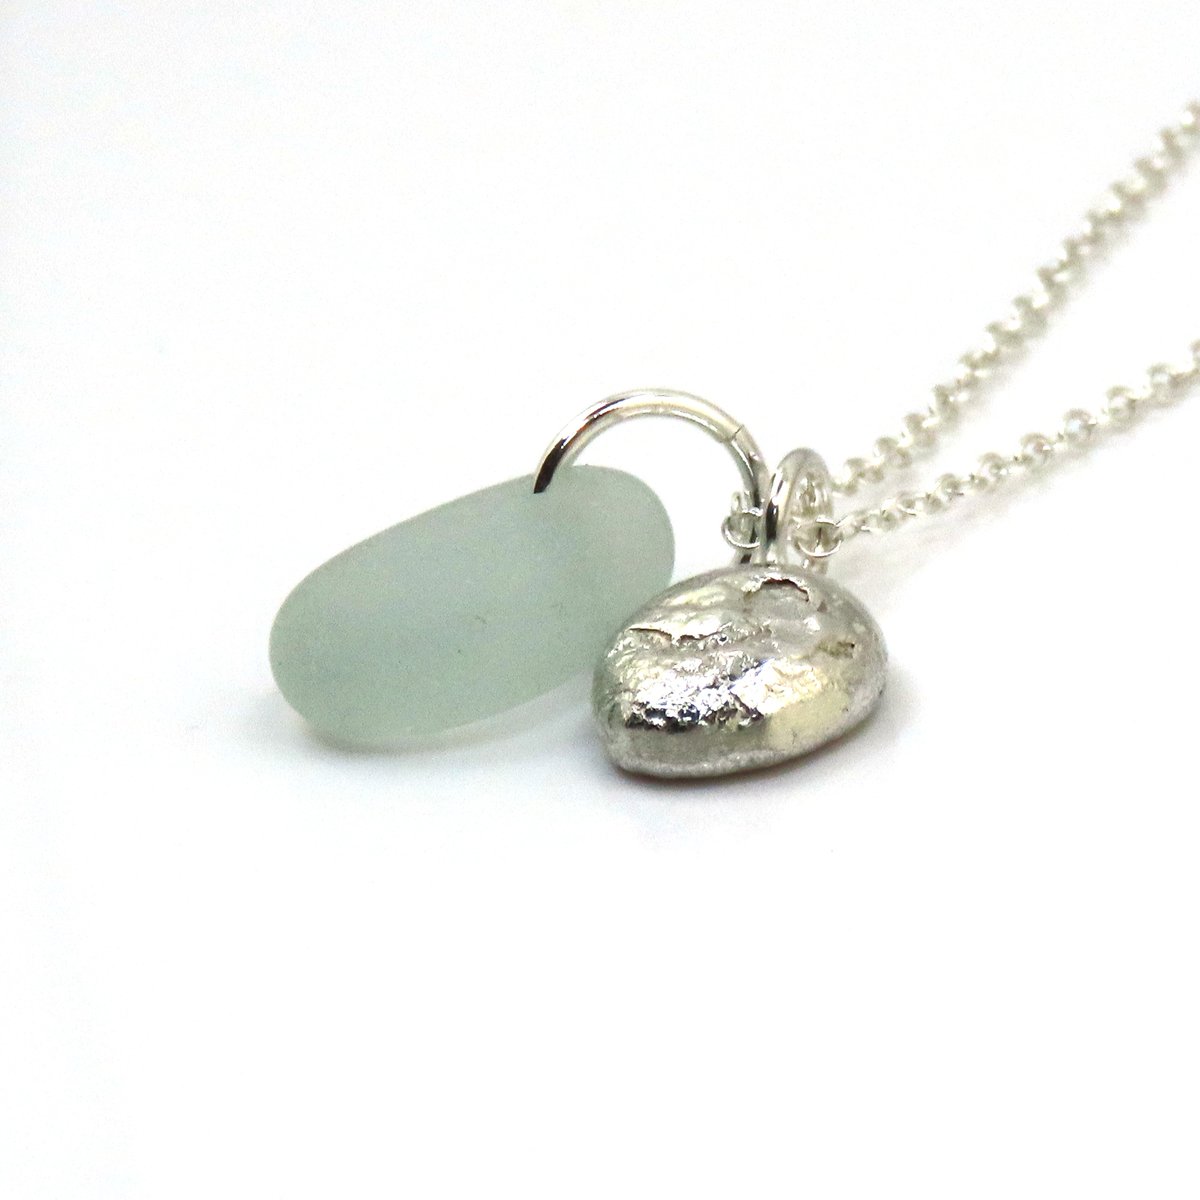 NEW! Seafoam Sea Glass Gem and Recycled Sterling Silver Pebble Necklace thestrandline.co.uk/ourshop/prod_8… #MHHSBD #shopindie #giftideas #seaglass #supportsmallbusiness #craftbizparty #handmadehour #womaninbizhour #sbs #firsttmaster